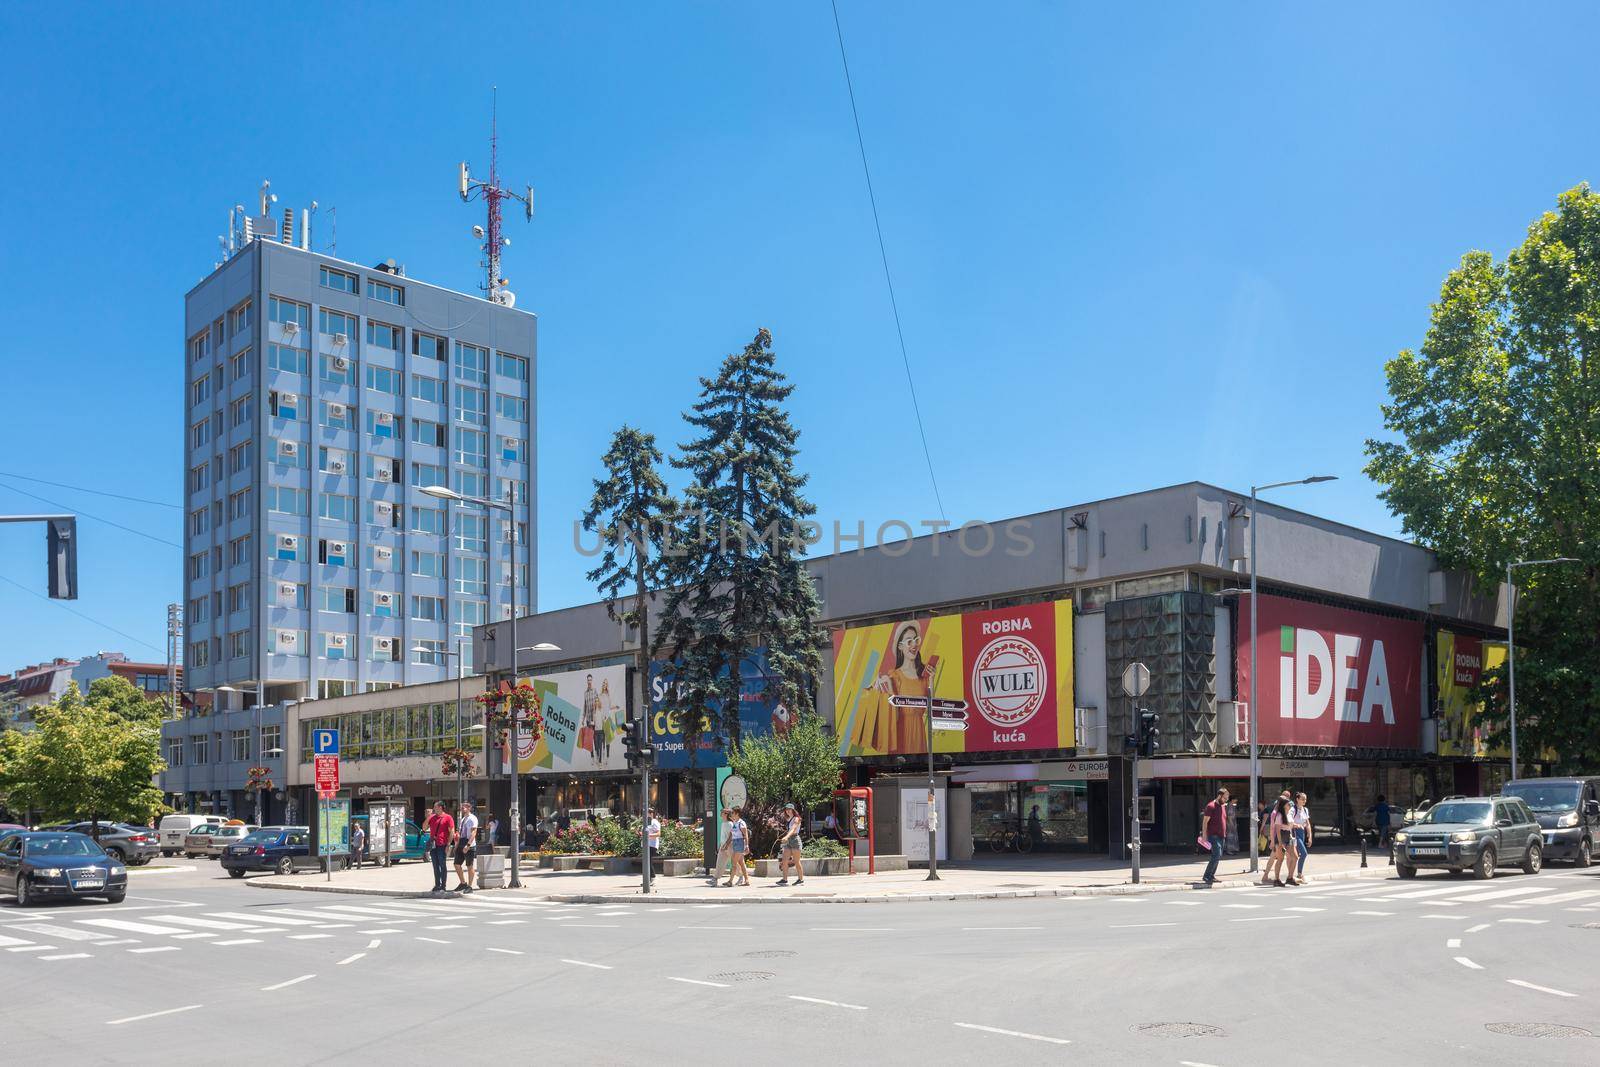 City assembly and shopping center in Valjevo, town in West Serbia by adamr